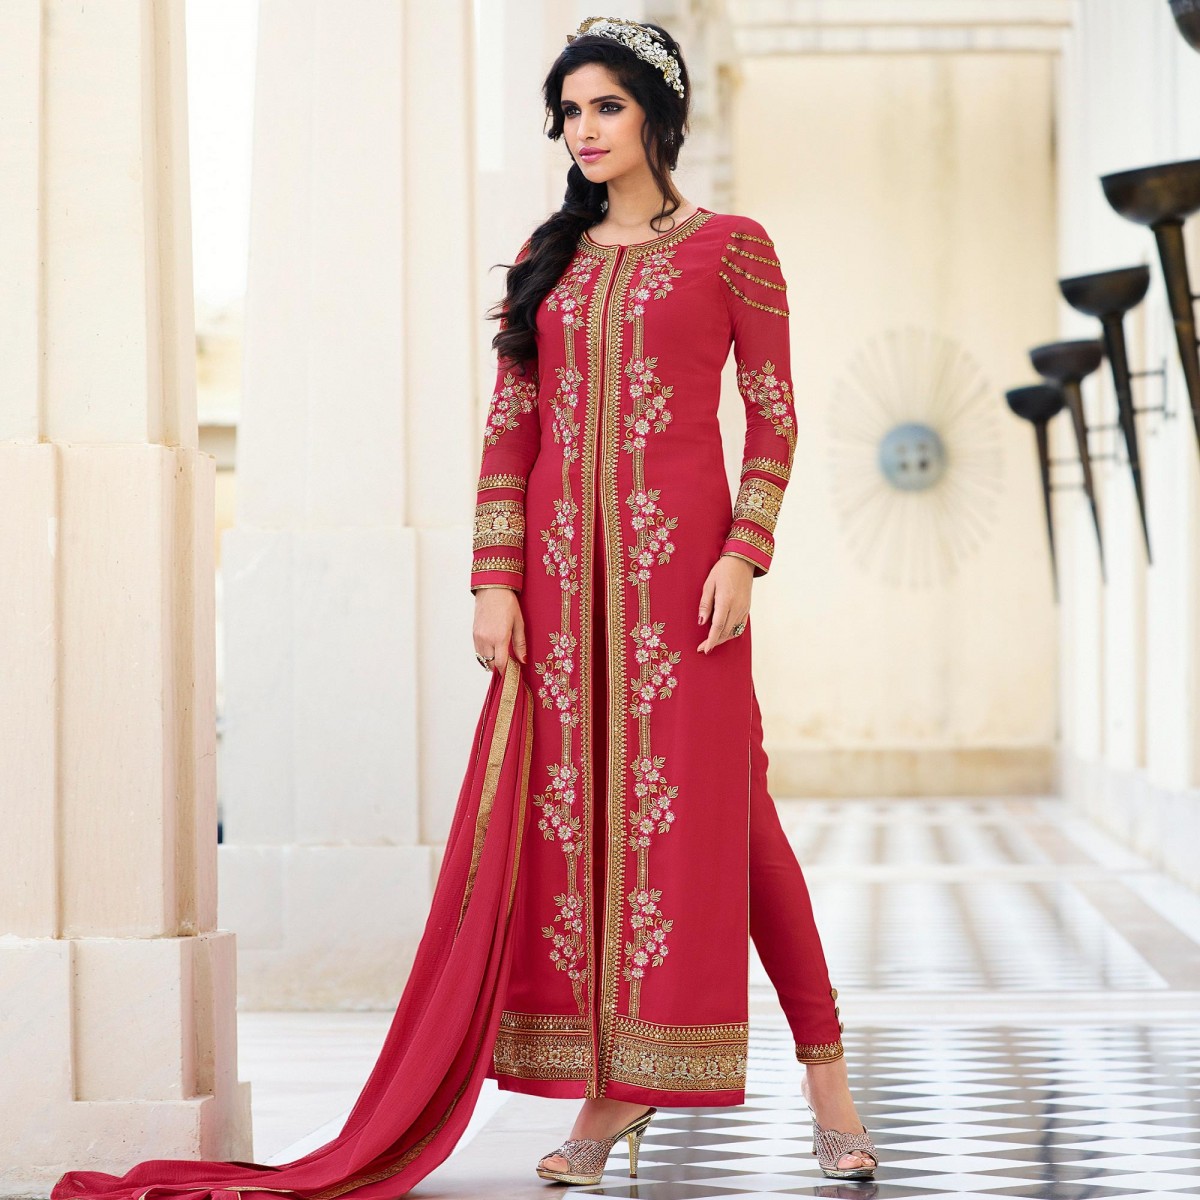 The model is wearing Red High Neck Churidar Suit.